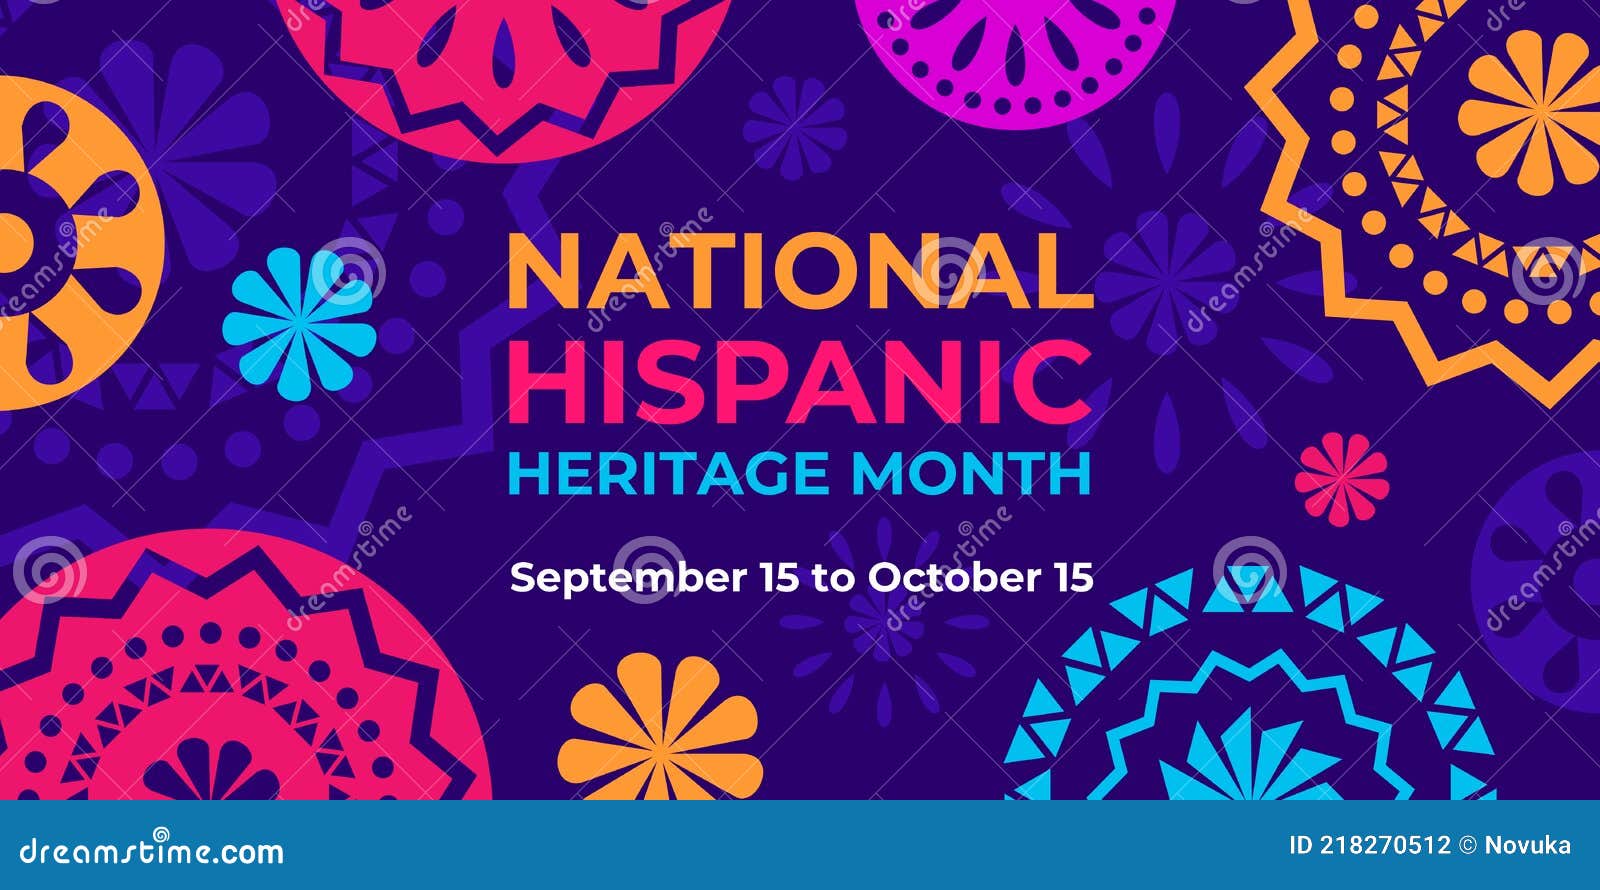 hispanic heritage month.  web banner, poster, card for social media, networks. greeting with national hispanic heritage